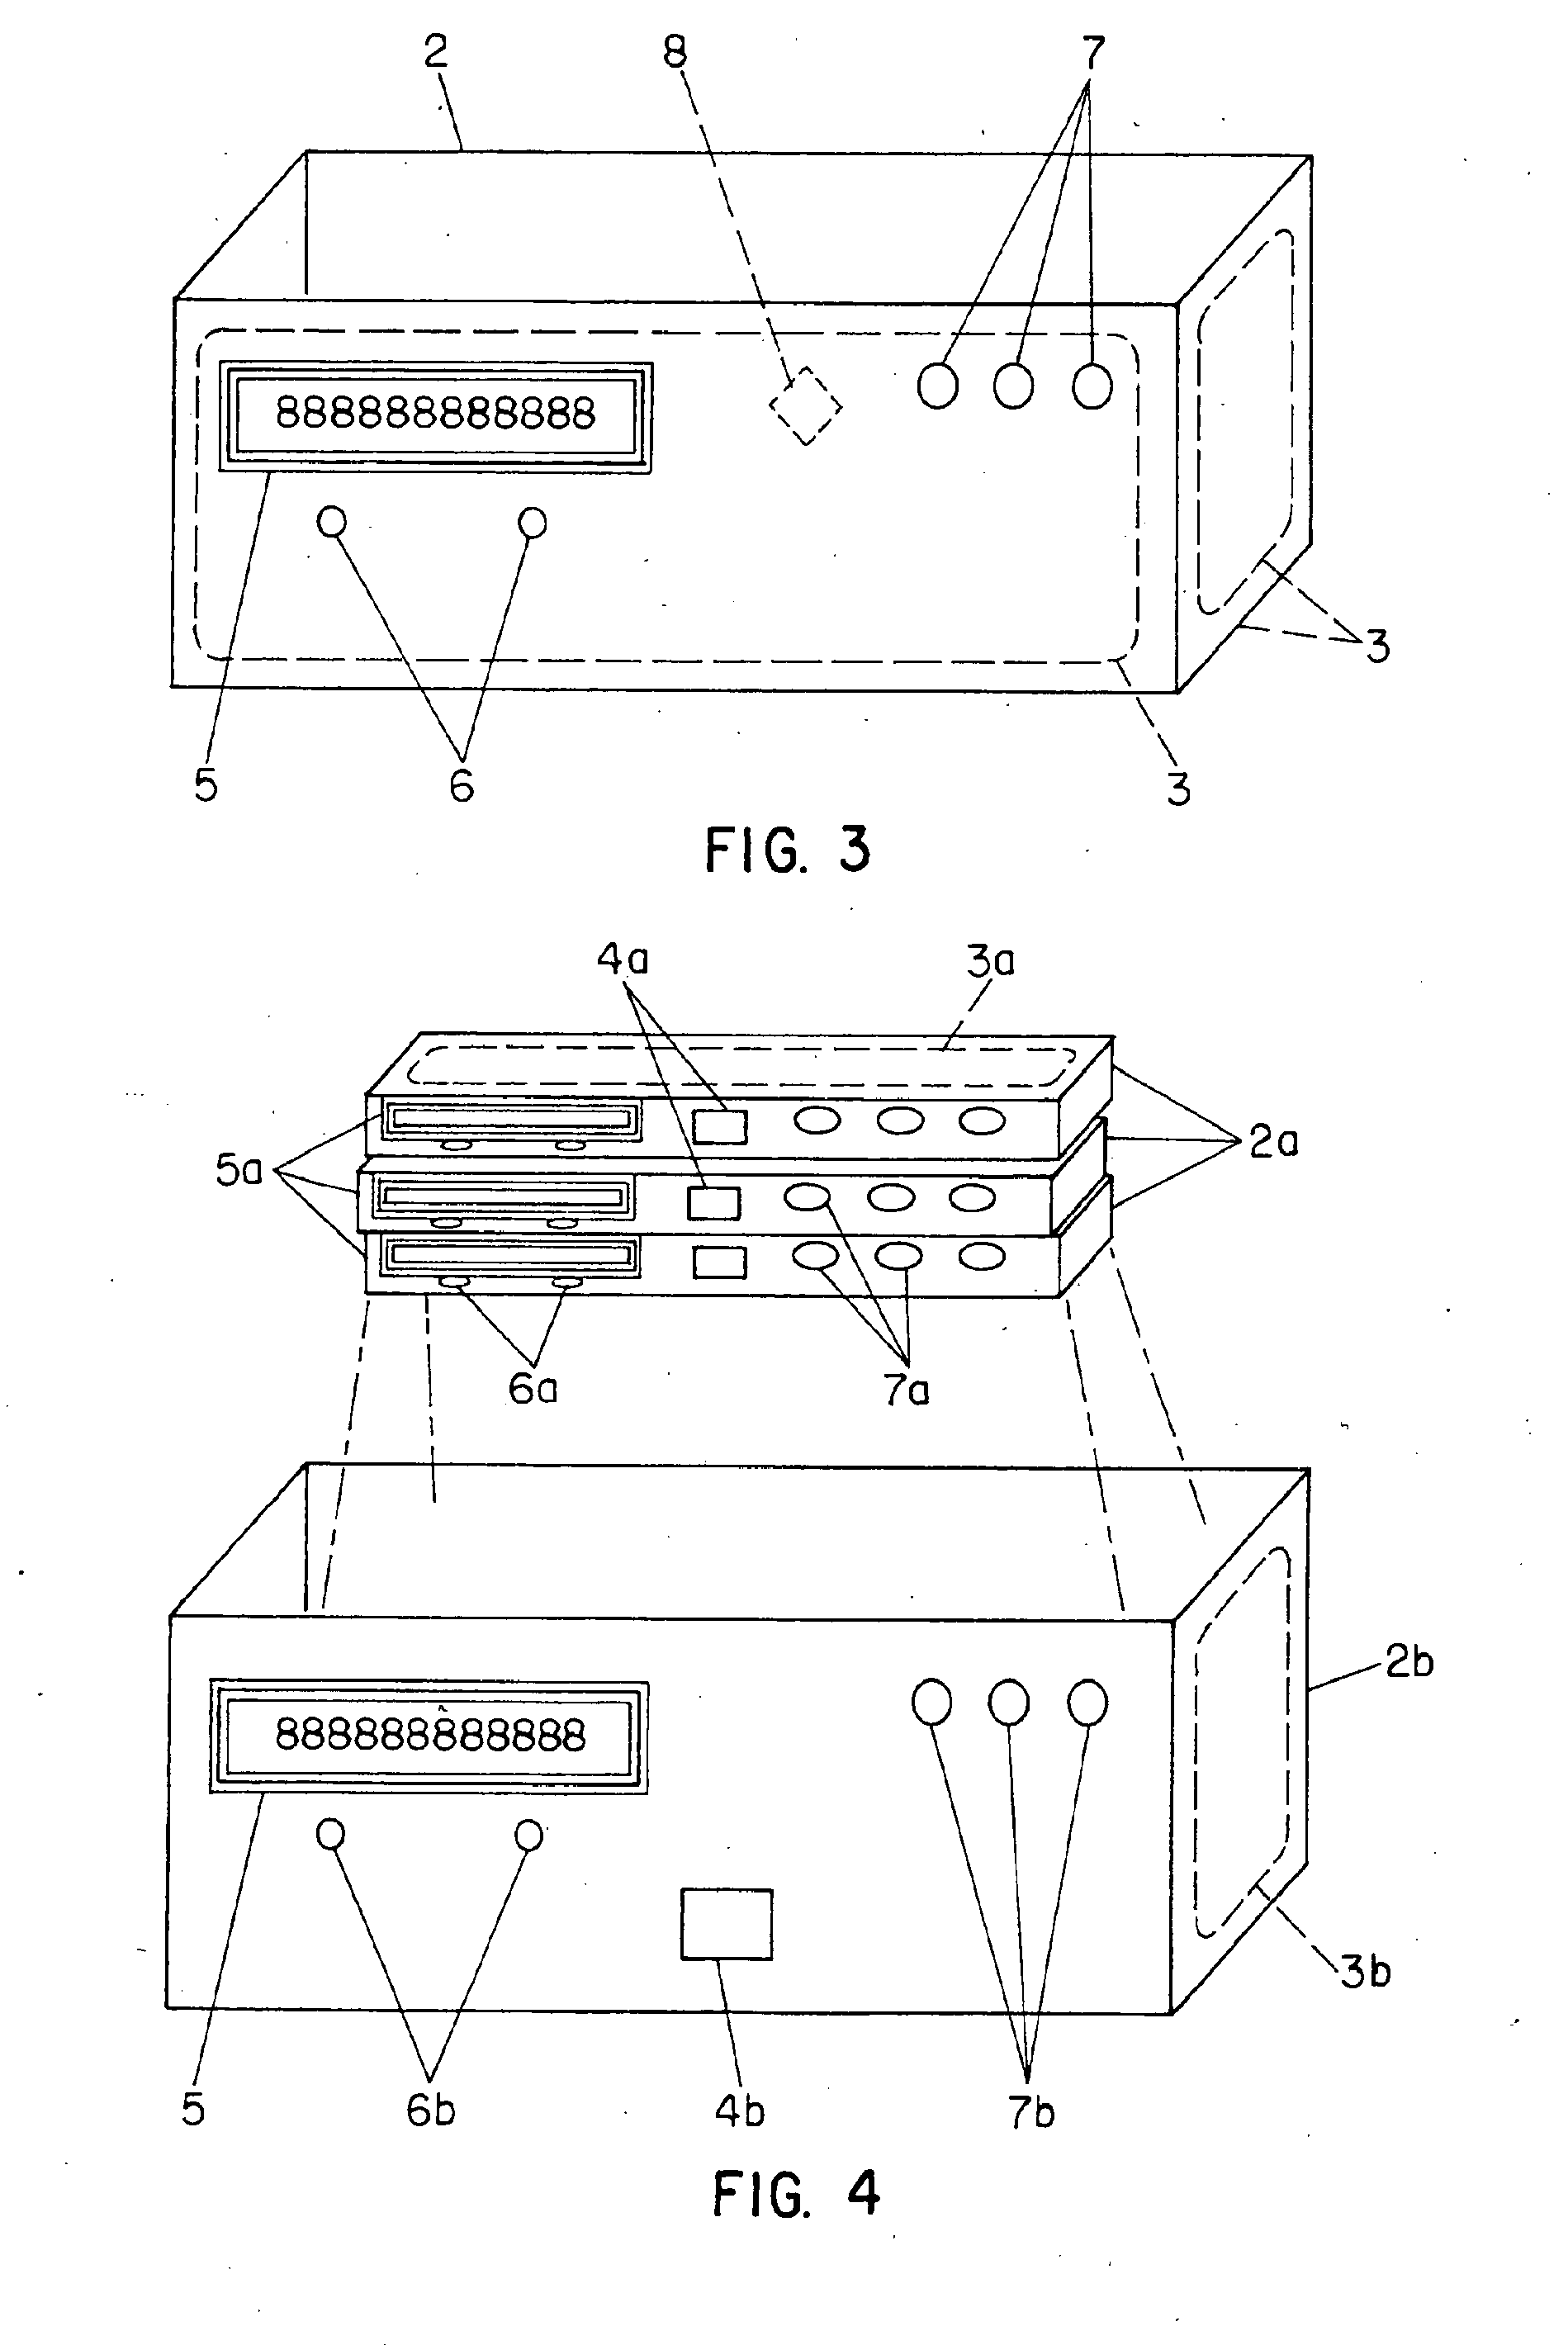 RF-Enablement of Products and Receptacles Therefor